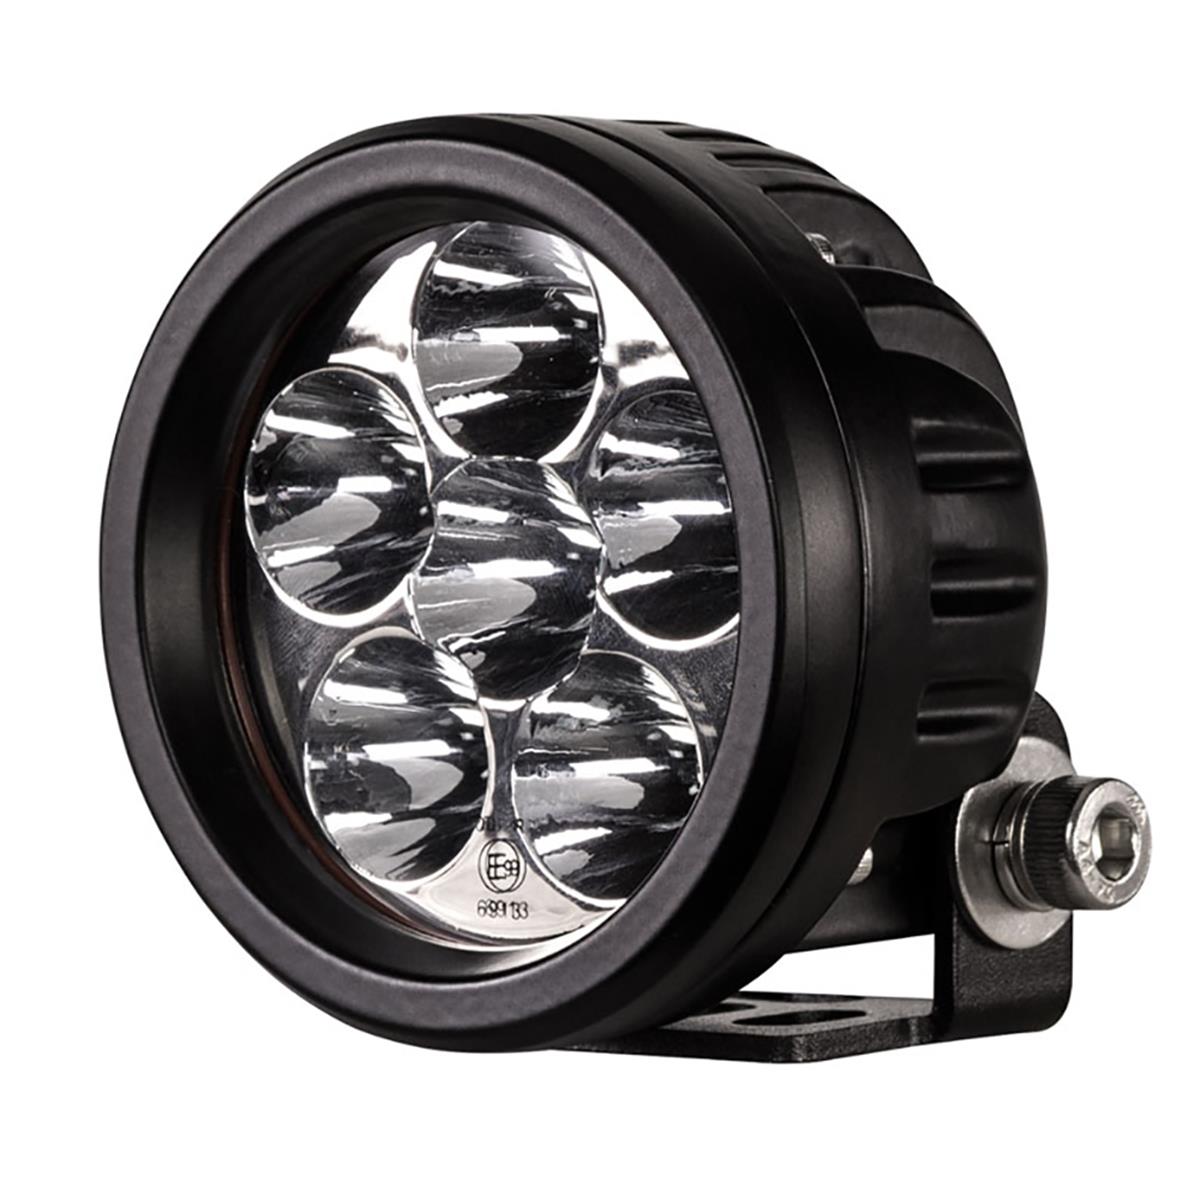 HE-DL2 3.5 in. LED Driving Light - Round -  HEISE LED Lighting Systems